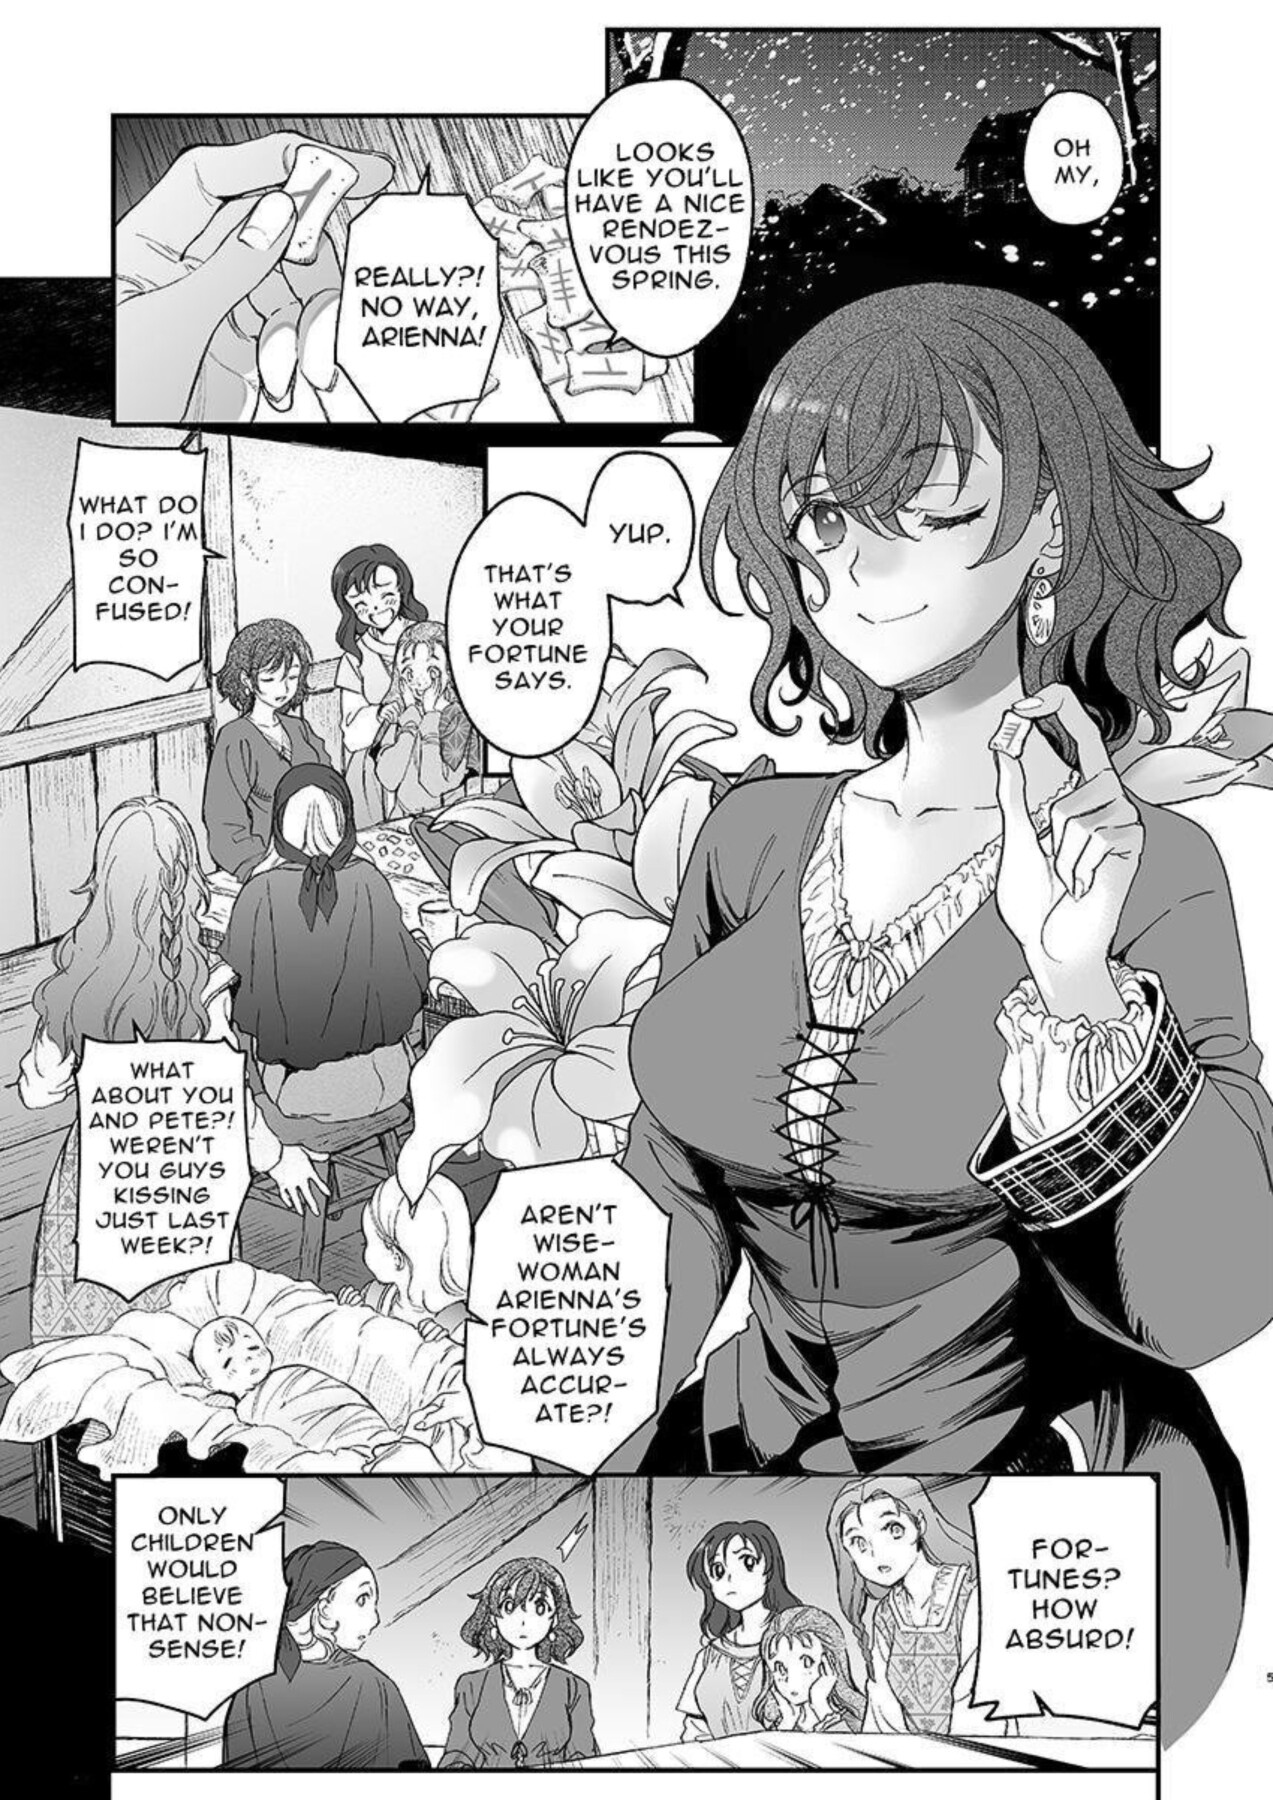 Hentai Manga Comic-The Condemned Wise Woman and The Loathsome Prince Who Adores Her・First Part-Read-2